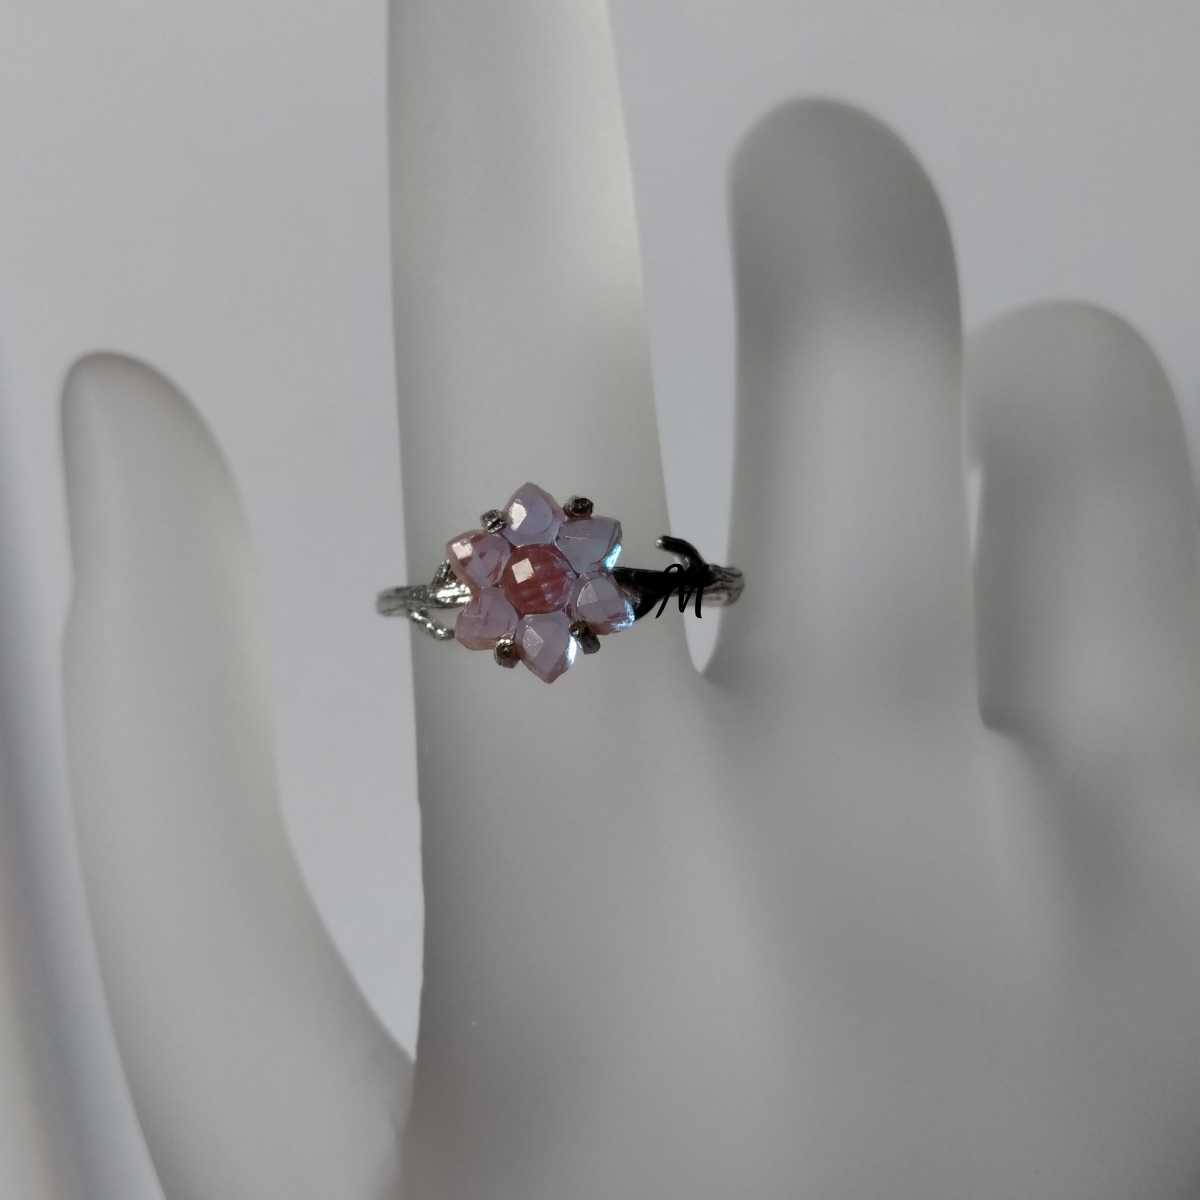  antique sa fillet crystal gala slow z cut flower . twig silver made ring / sterling silver rhodium plating button Czech 